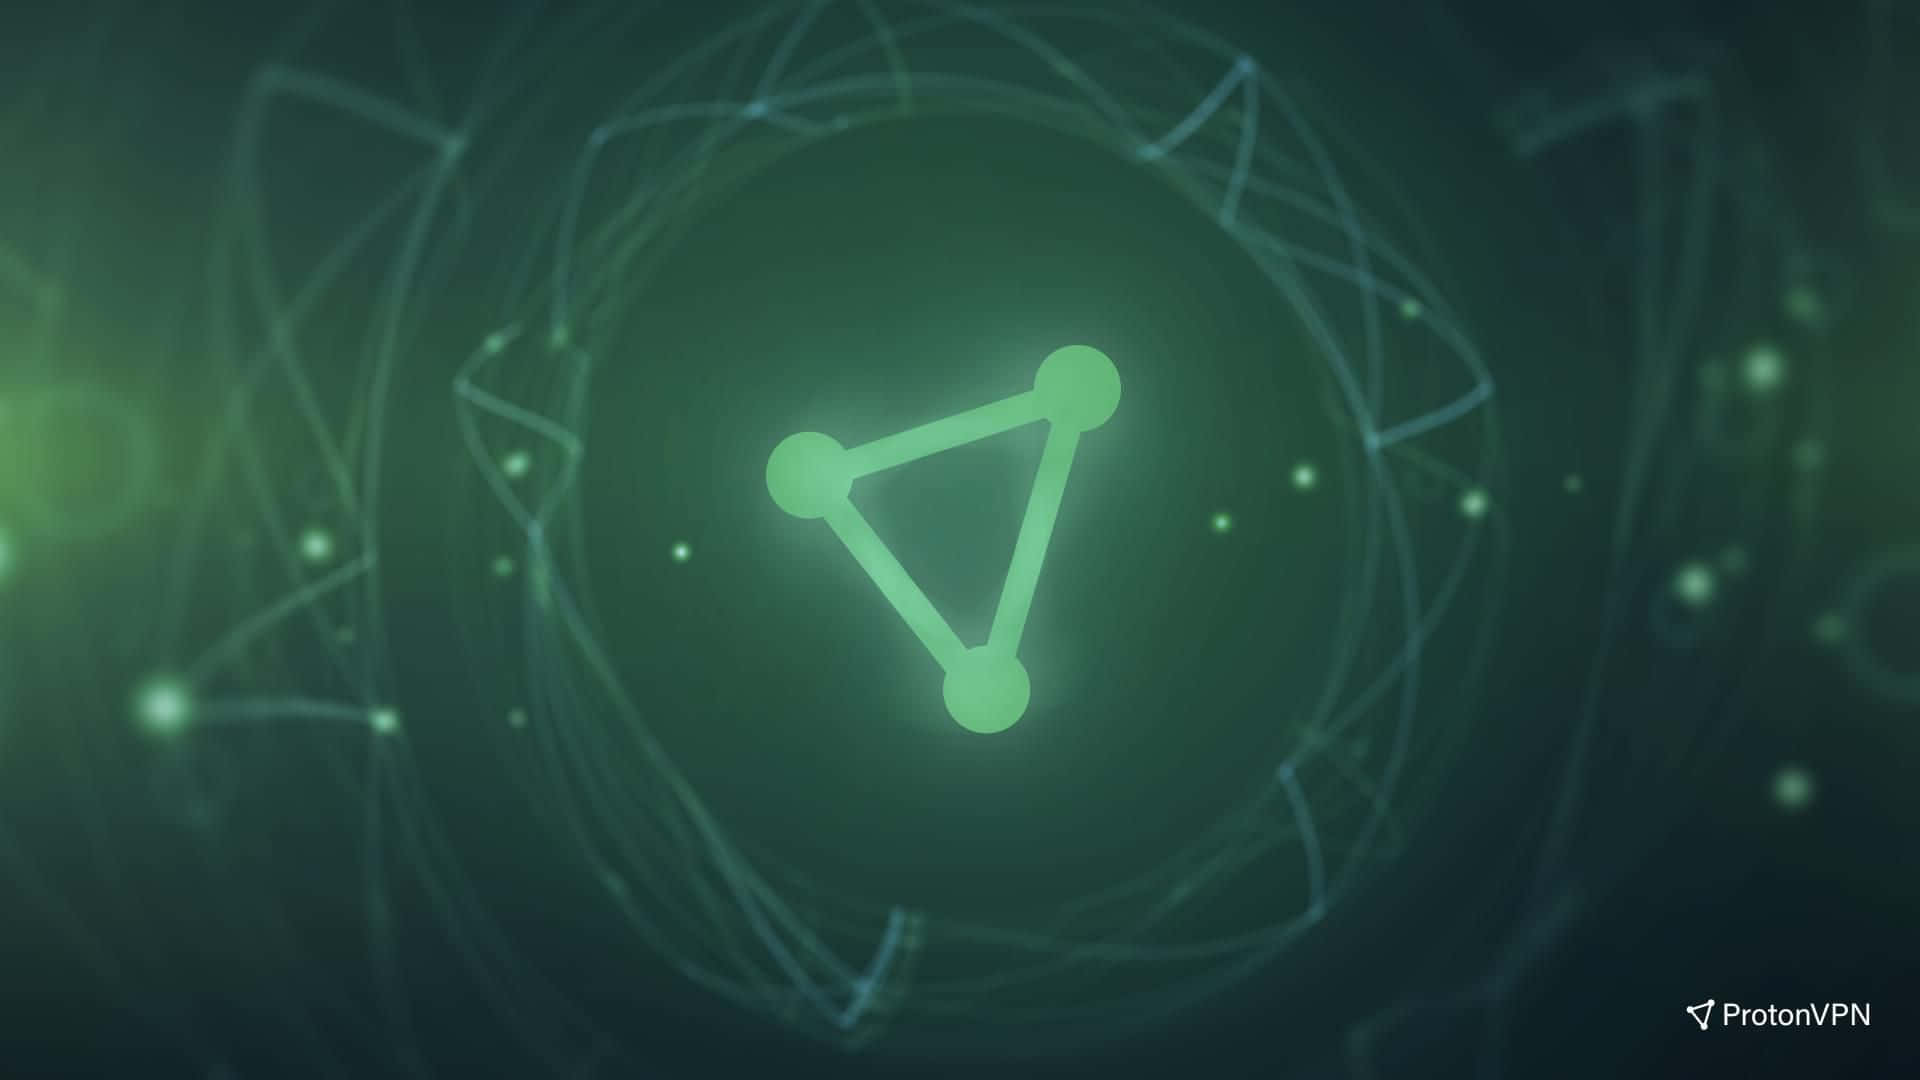 A Green Circle With A Green Arrow In The Middle Wallpaper